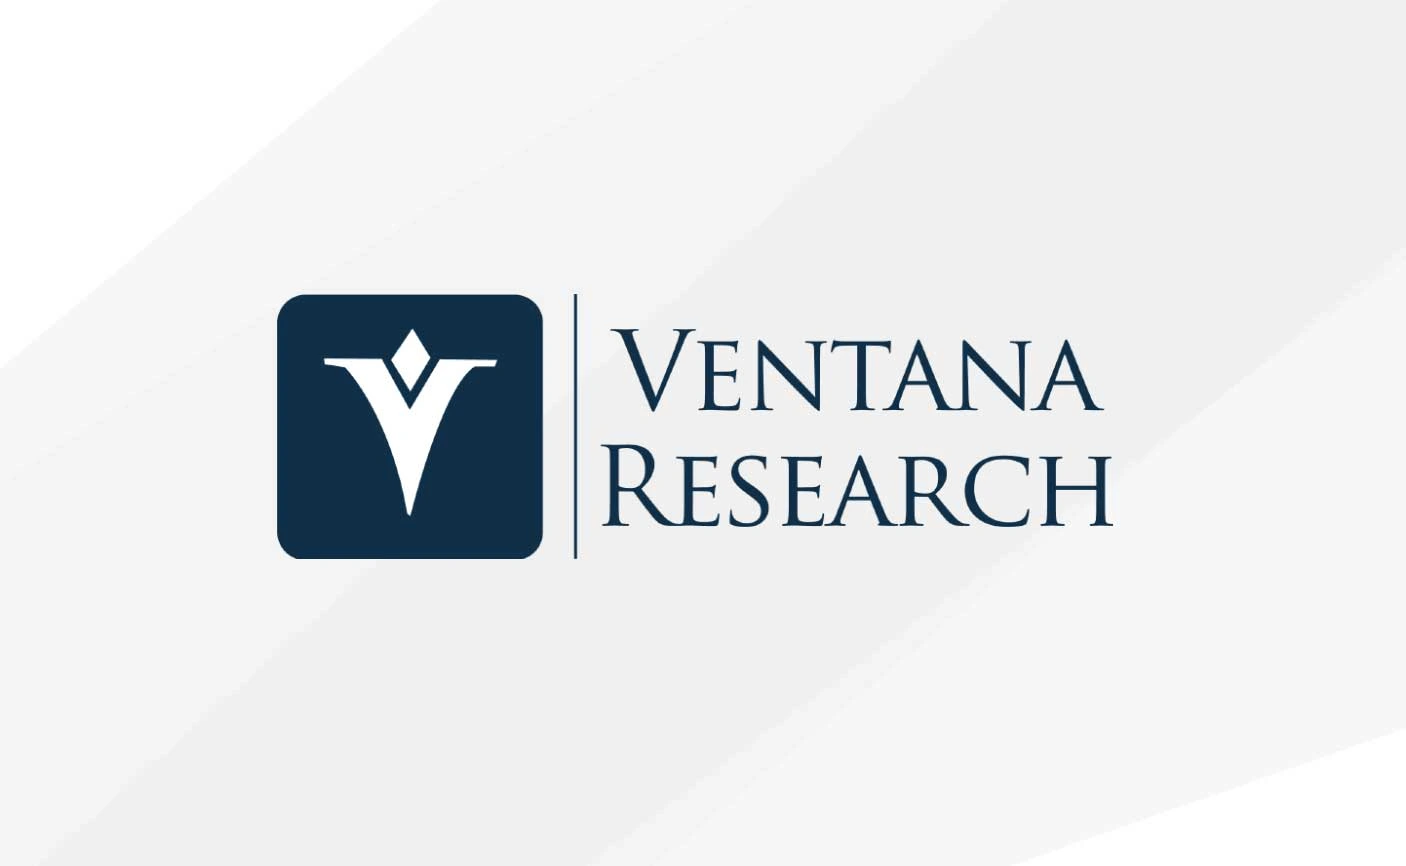 Quote from Ventana Research